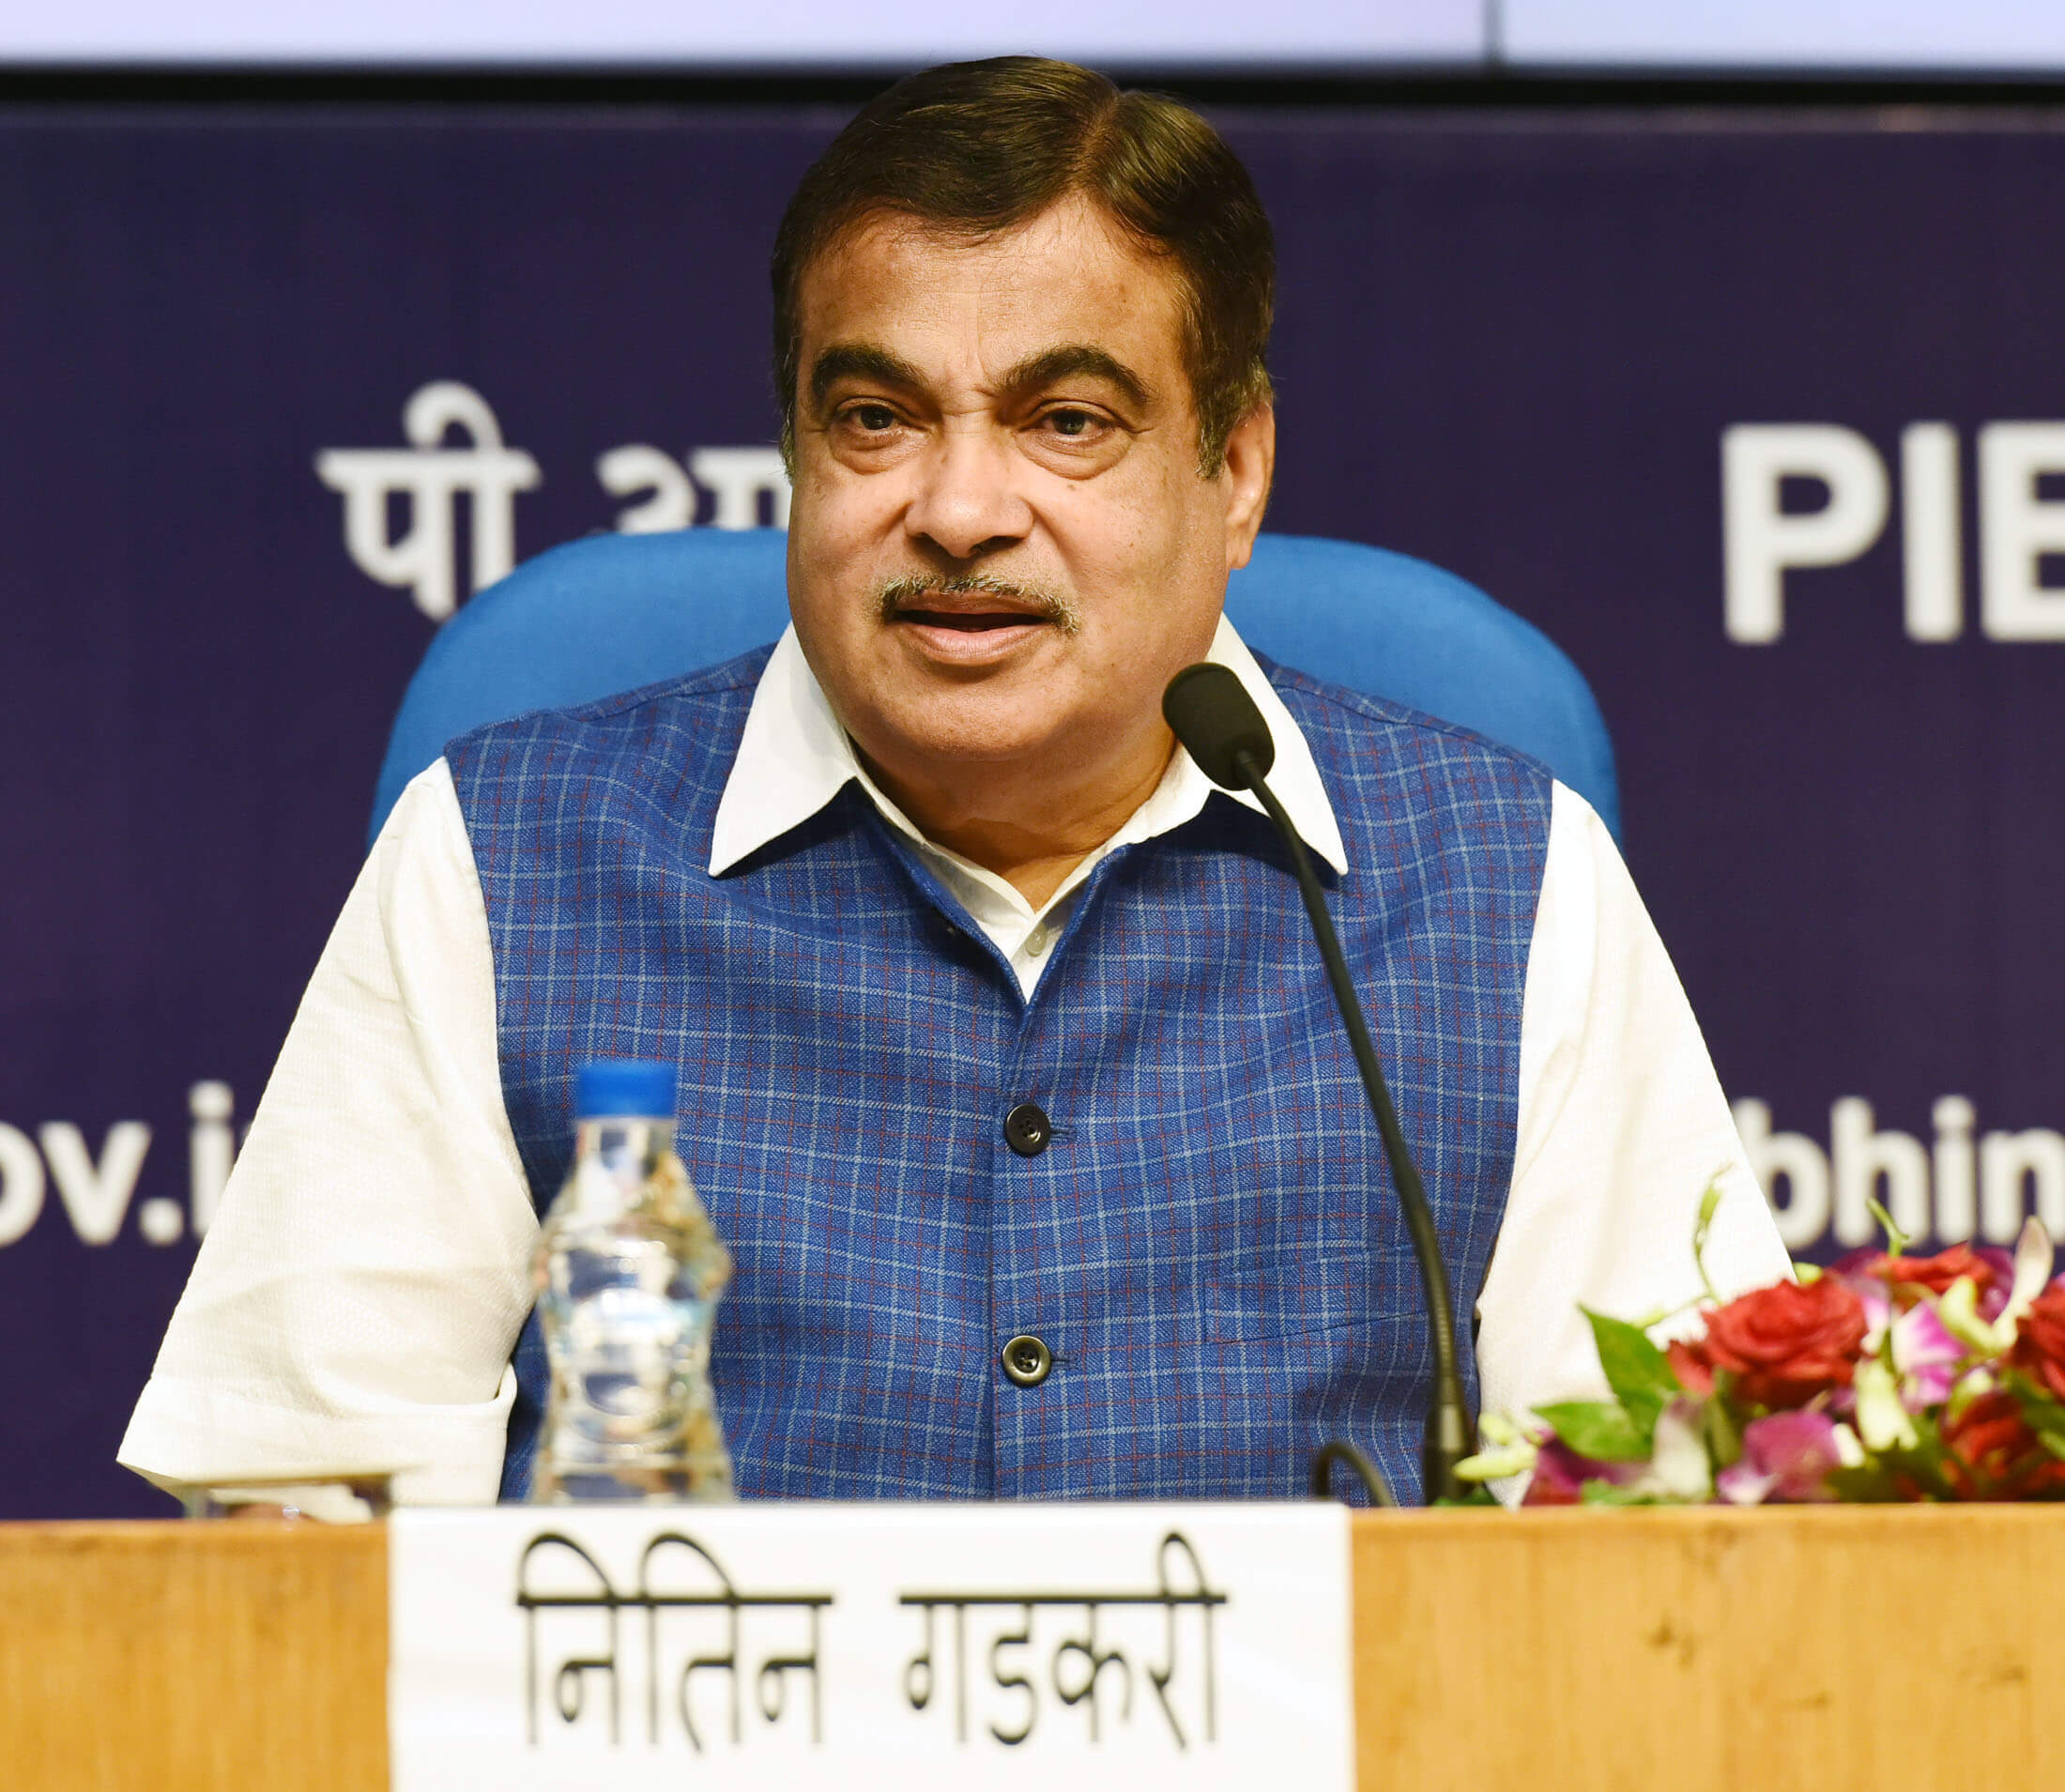 Nitin Gadkari Wiki, Age, Height, Weight, Political Career, Education, Family, Wife, Biography & More